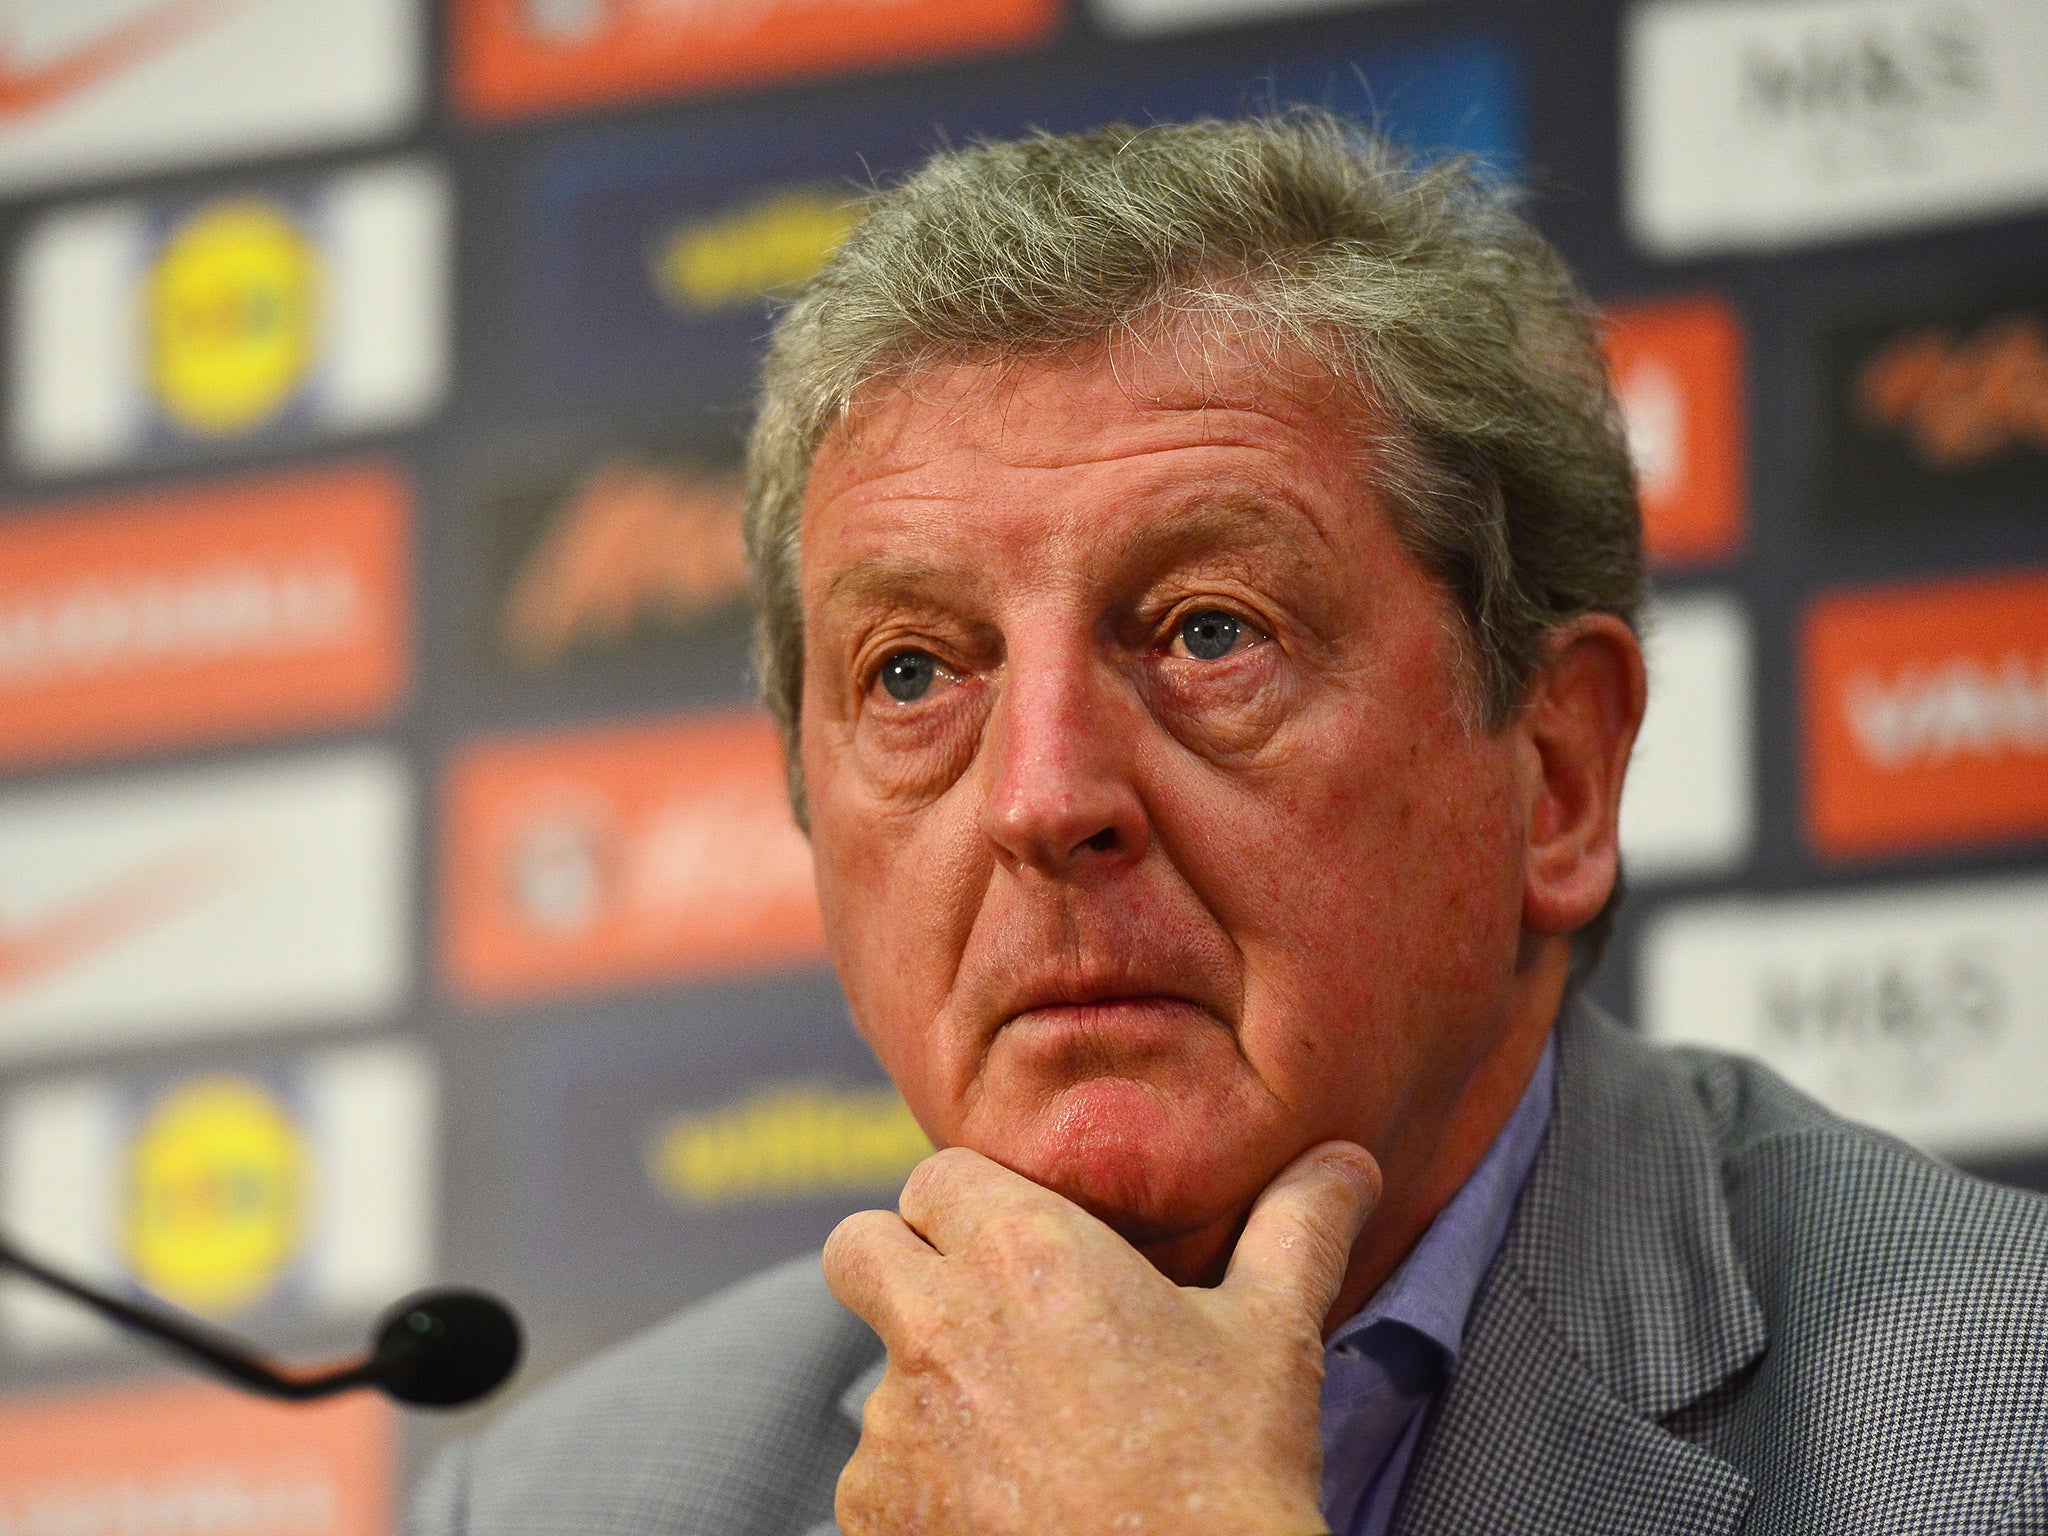 England manager Roy Hodgson will face questions over his England squad selection